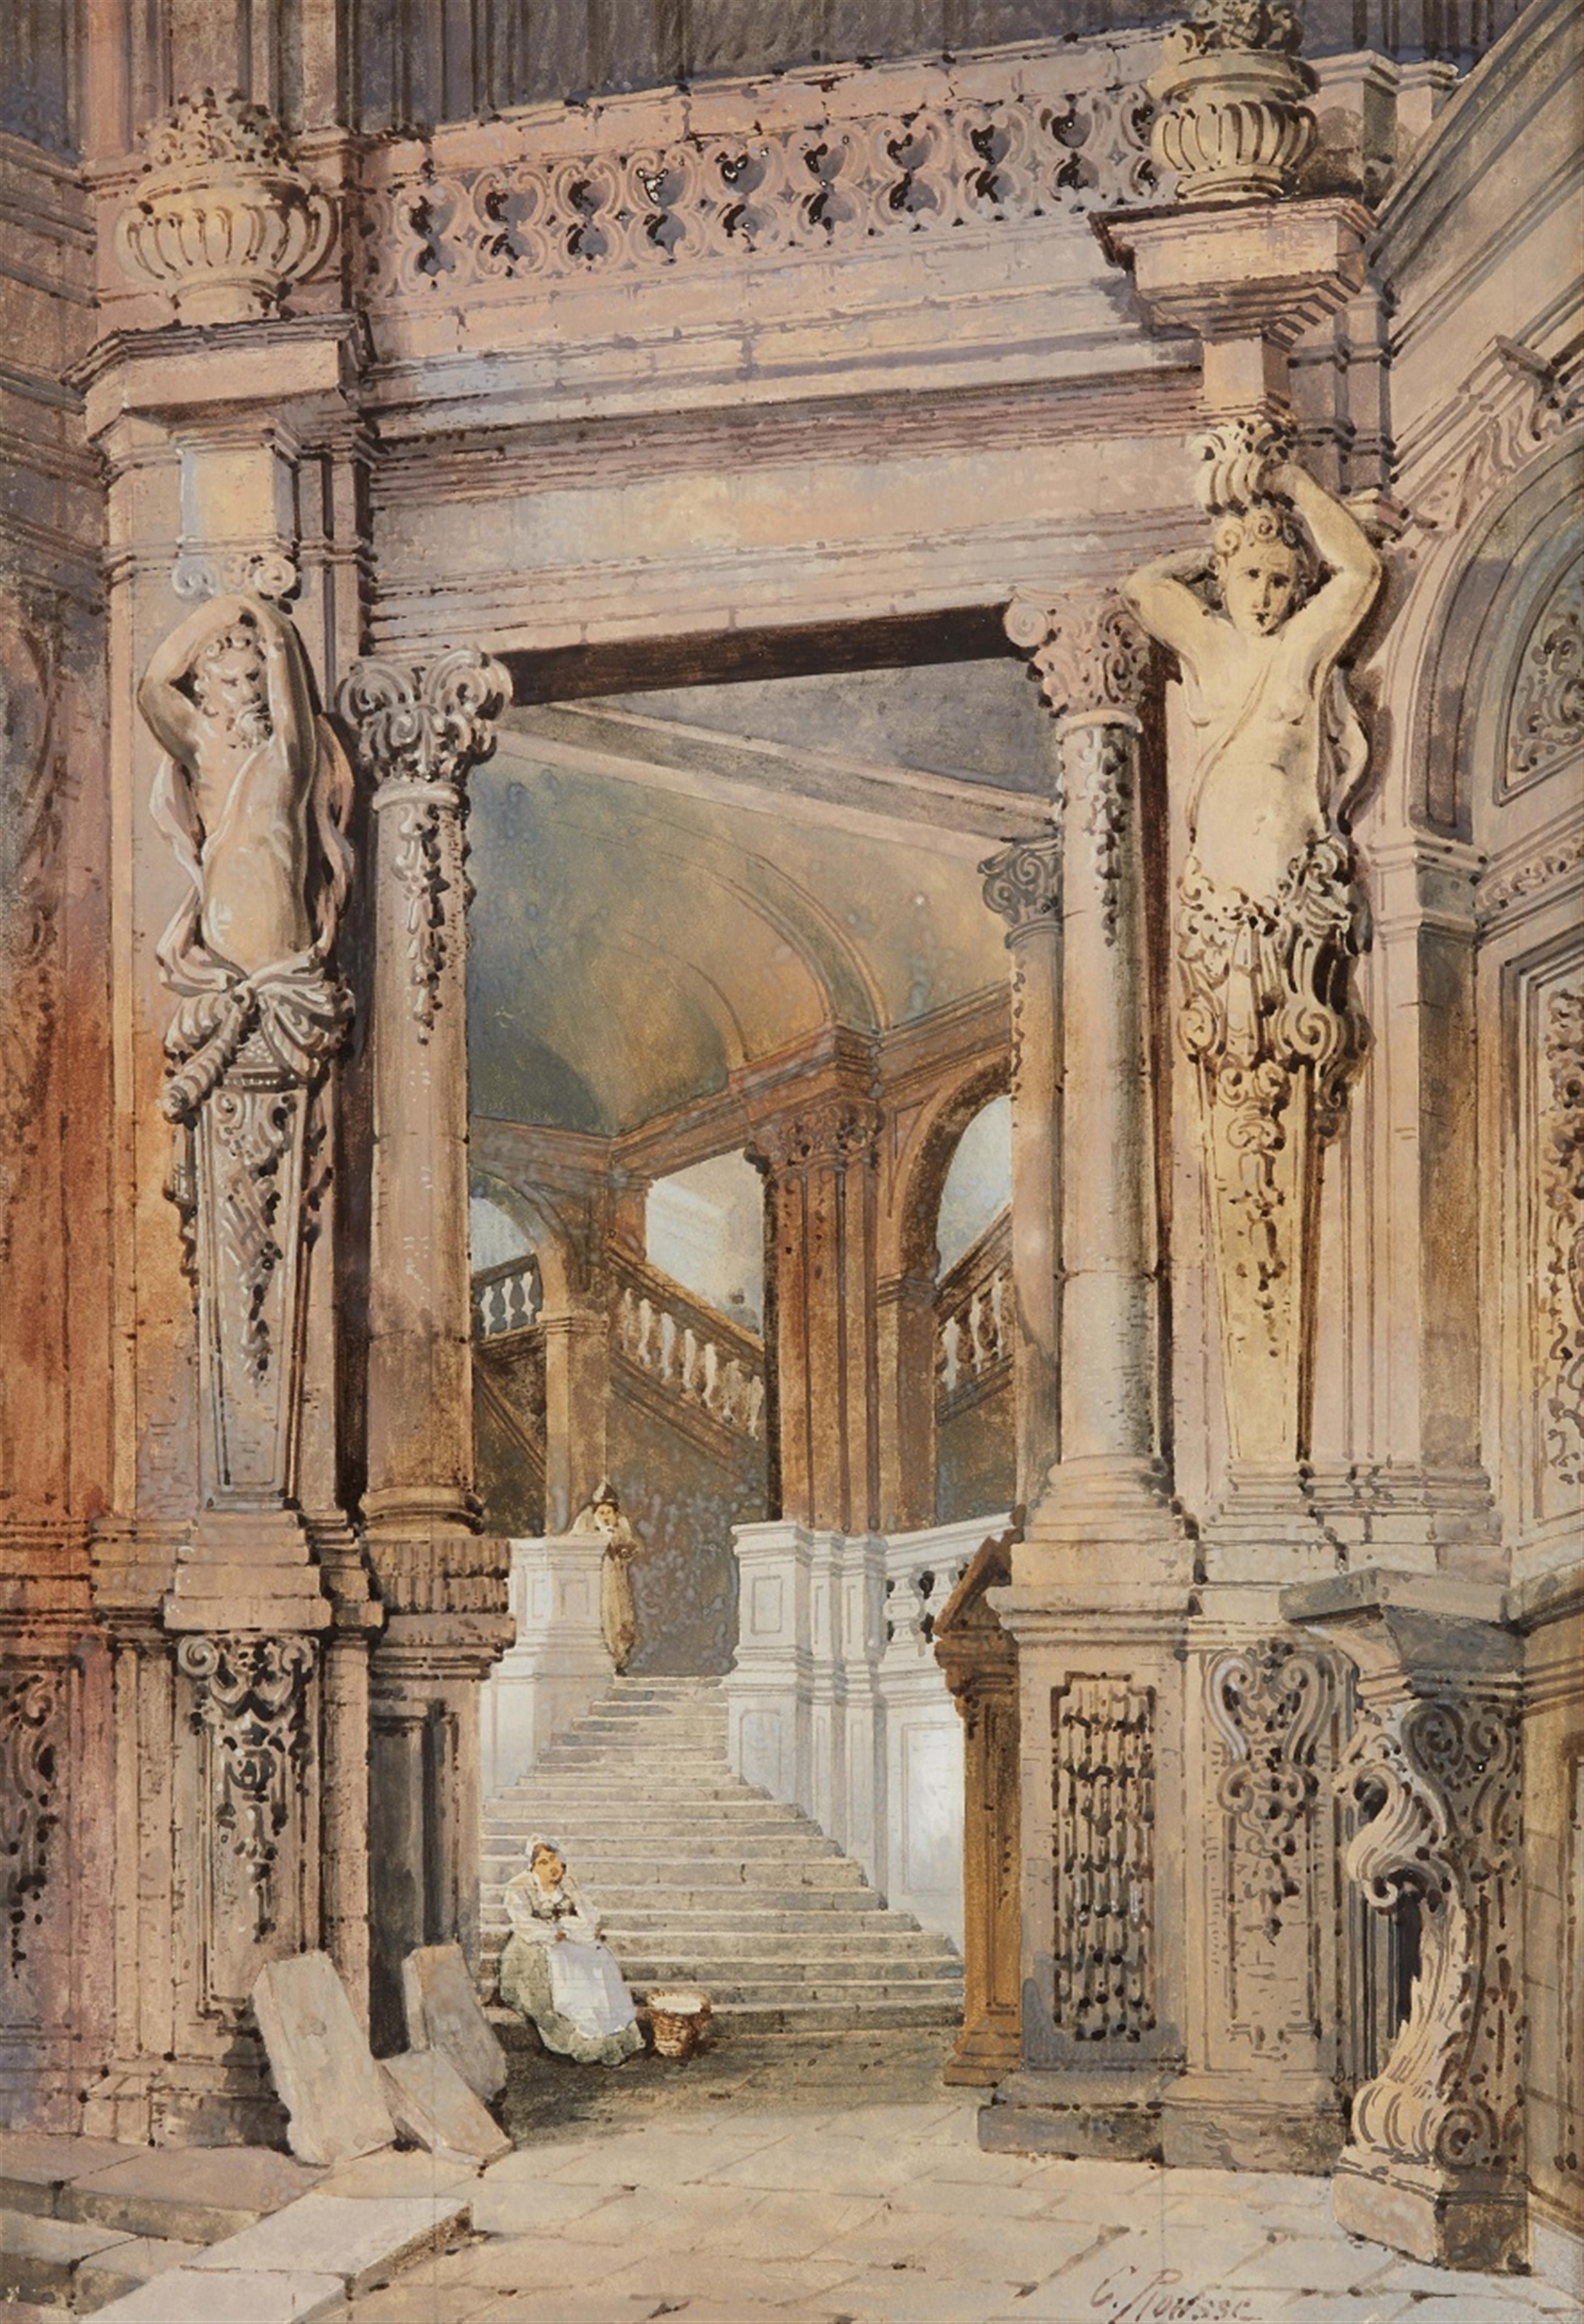 Charles Rousse - The Staircase in the Wallpavillon of the Zwinger in Dresden - image-1